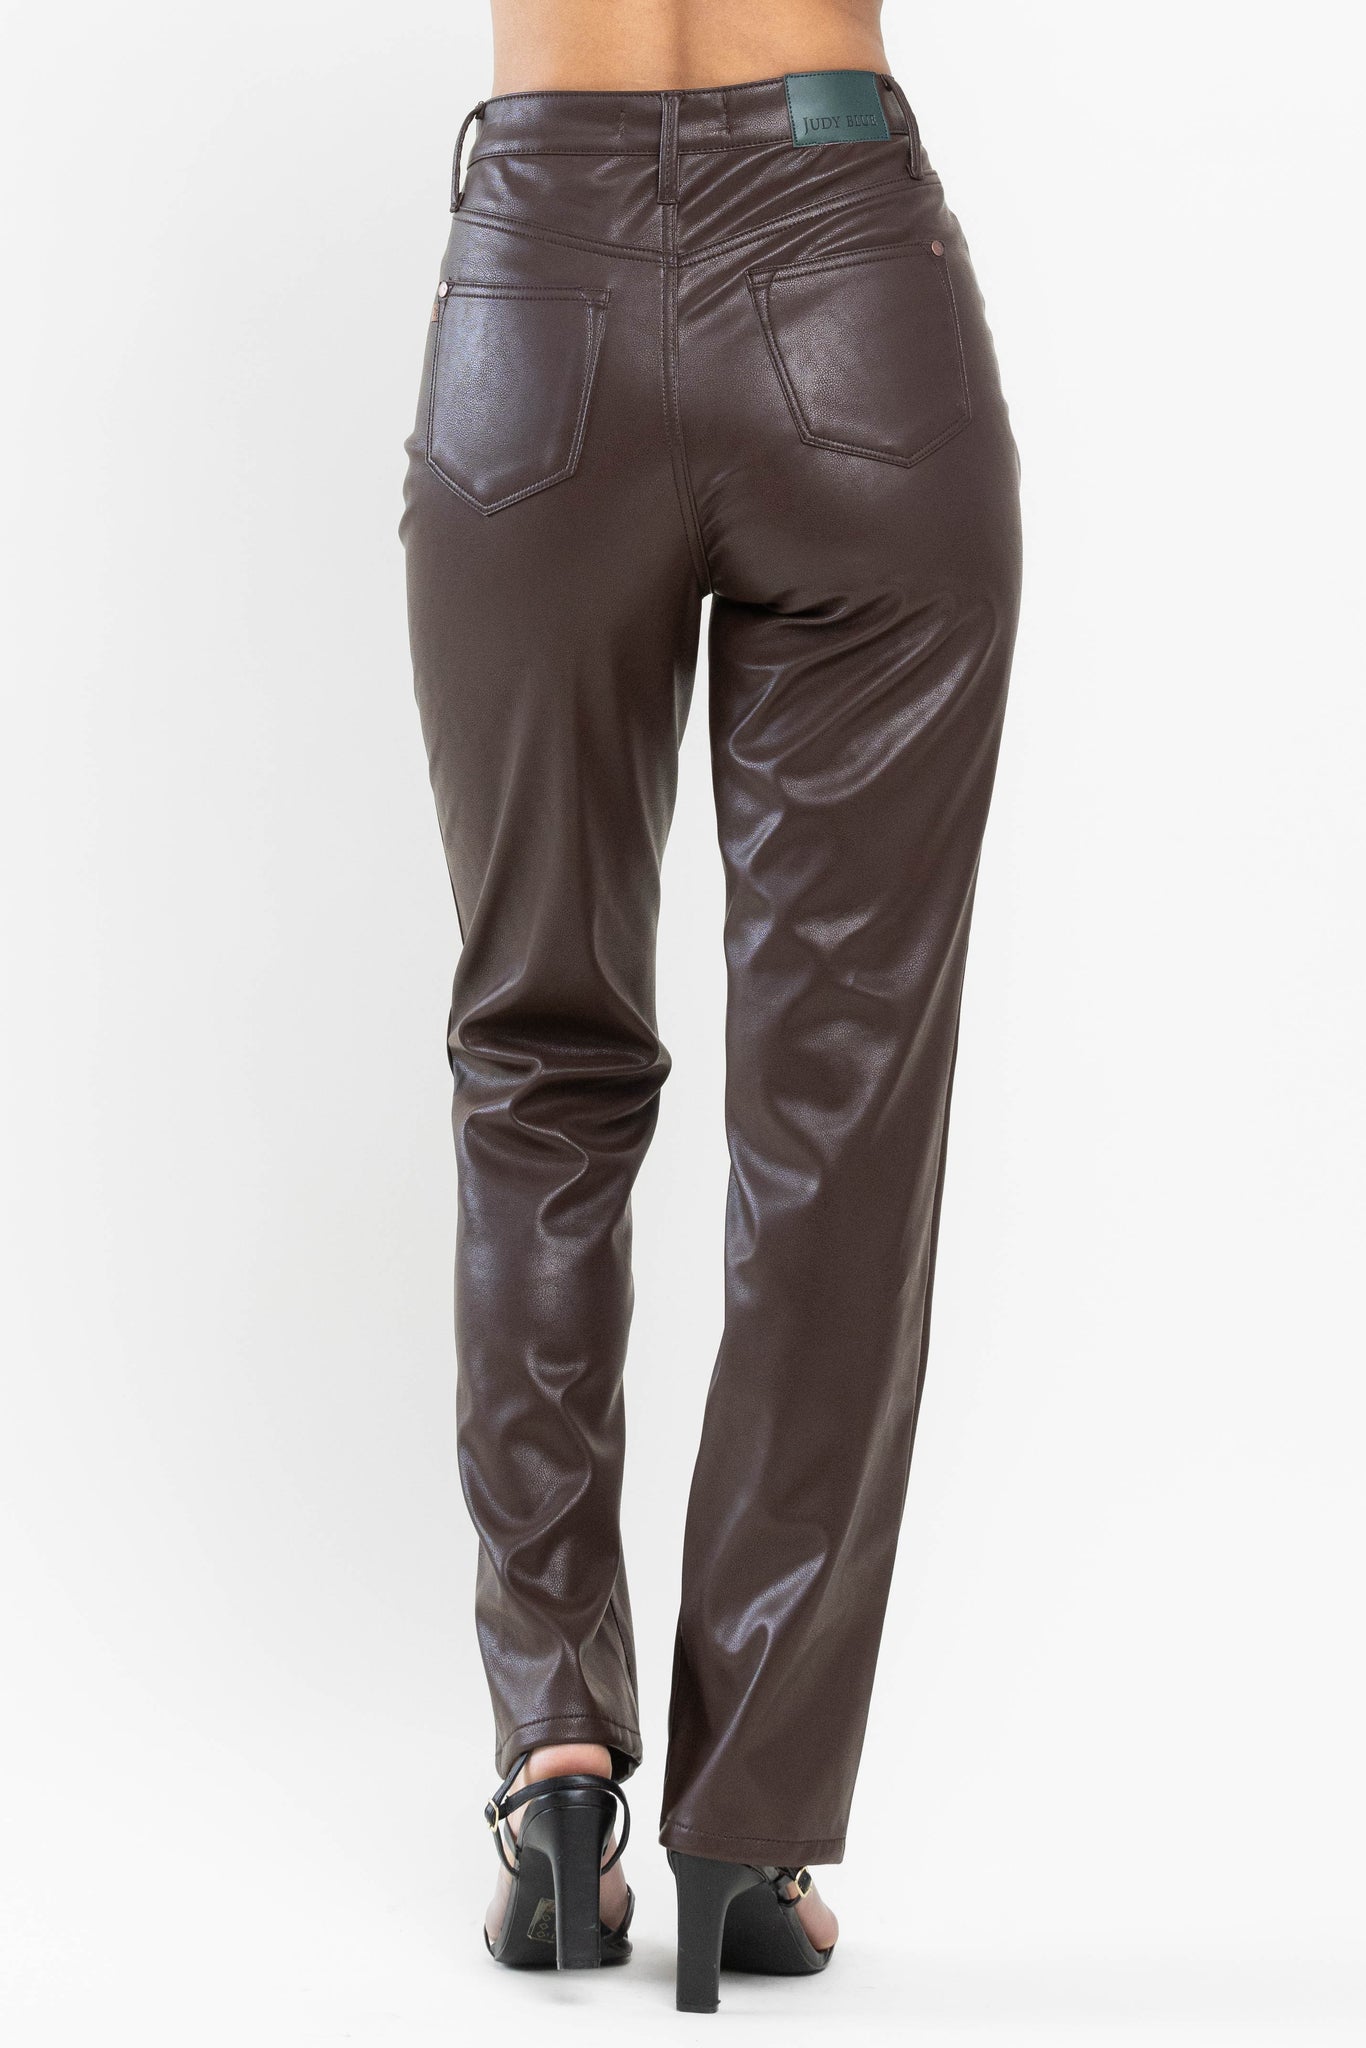 Tummy Control Judy Blue Faux Leather Pants Expresso